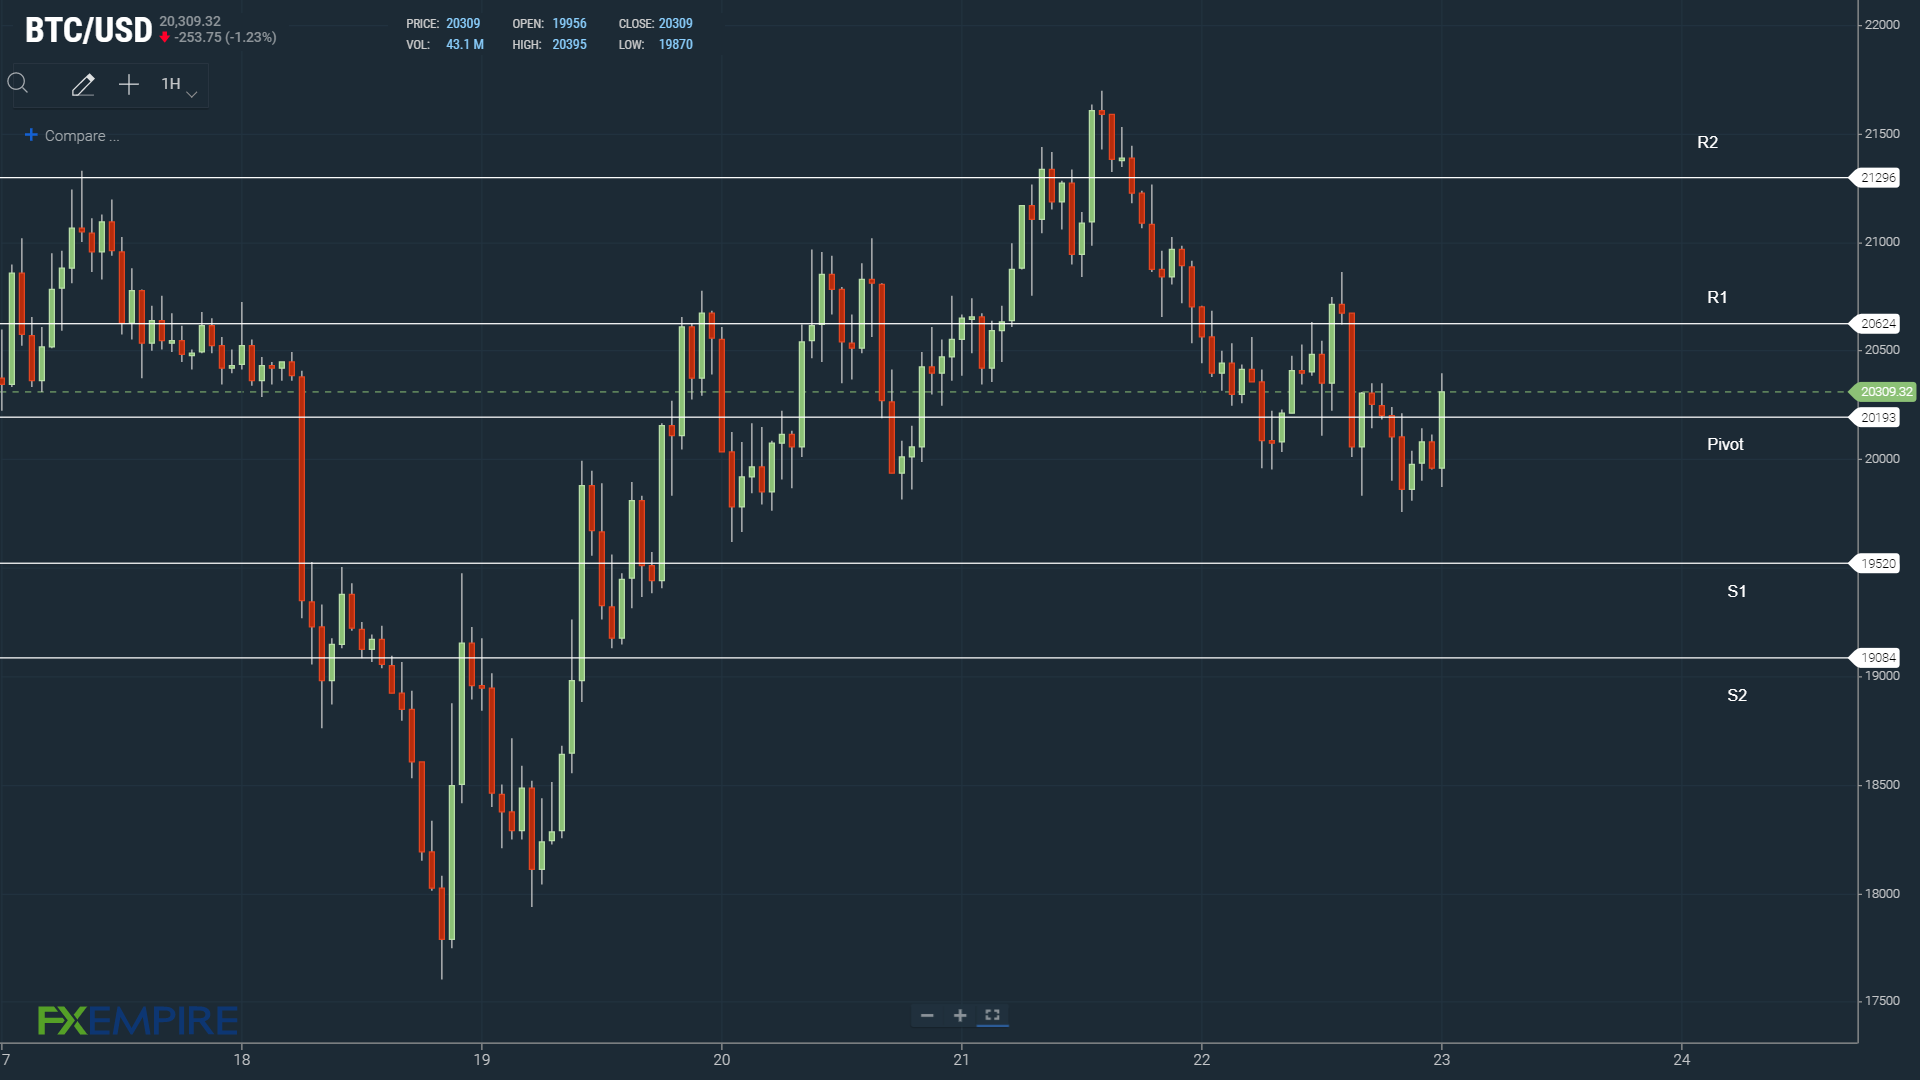 BTC support at $20,000 key.